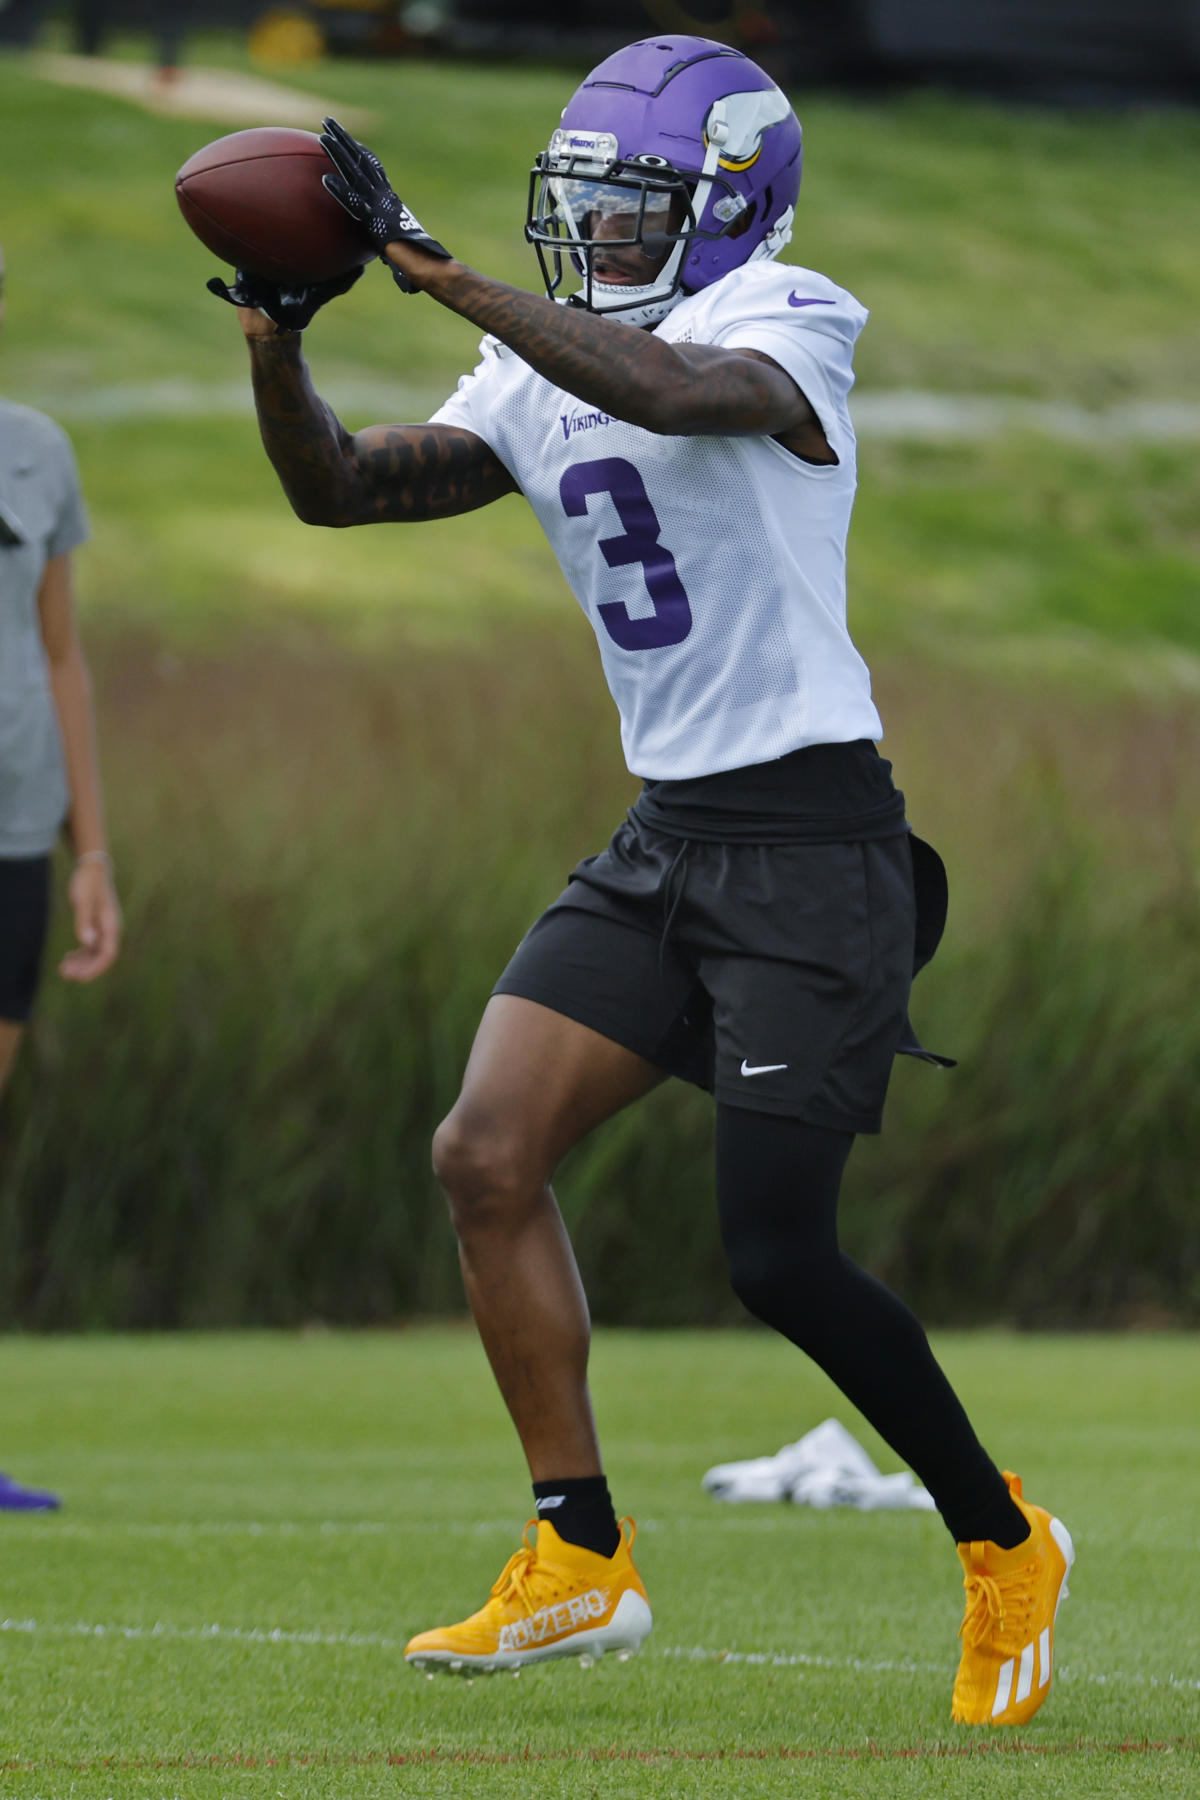 Vikings rookie Jordan Addison is turning heads in training camp after rocky off-the-field start